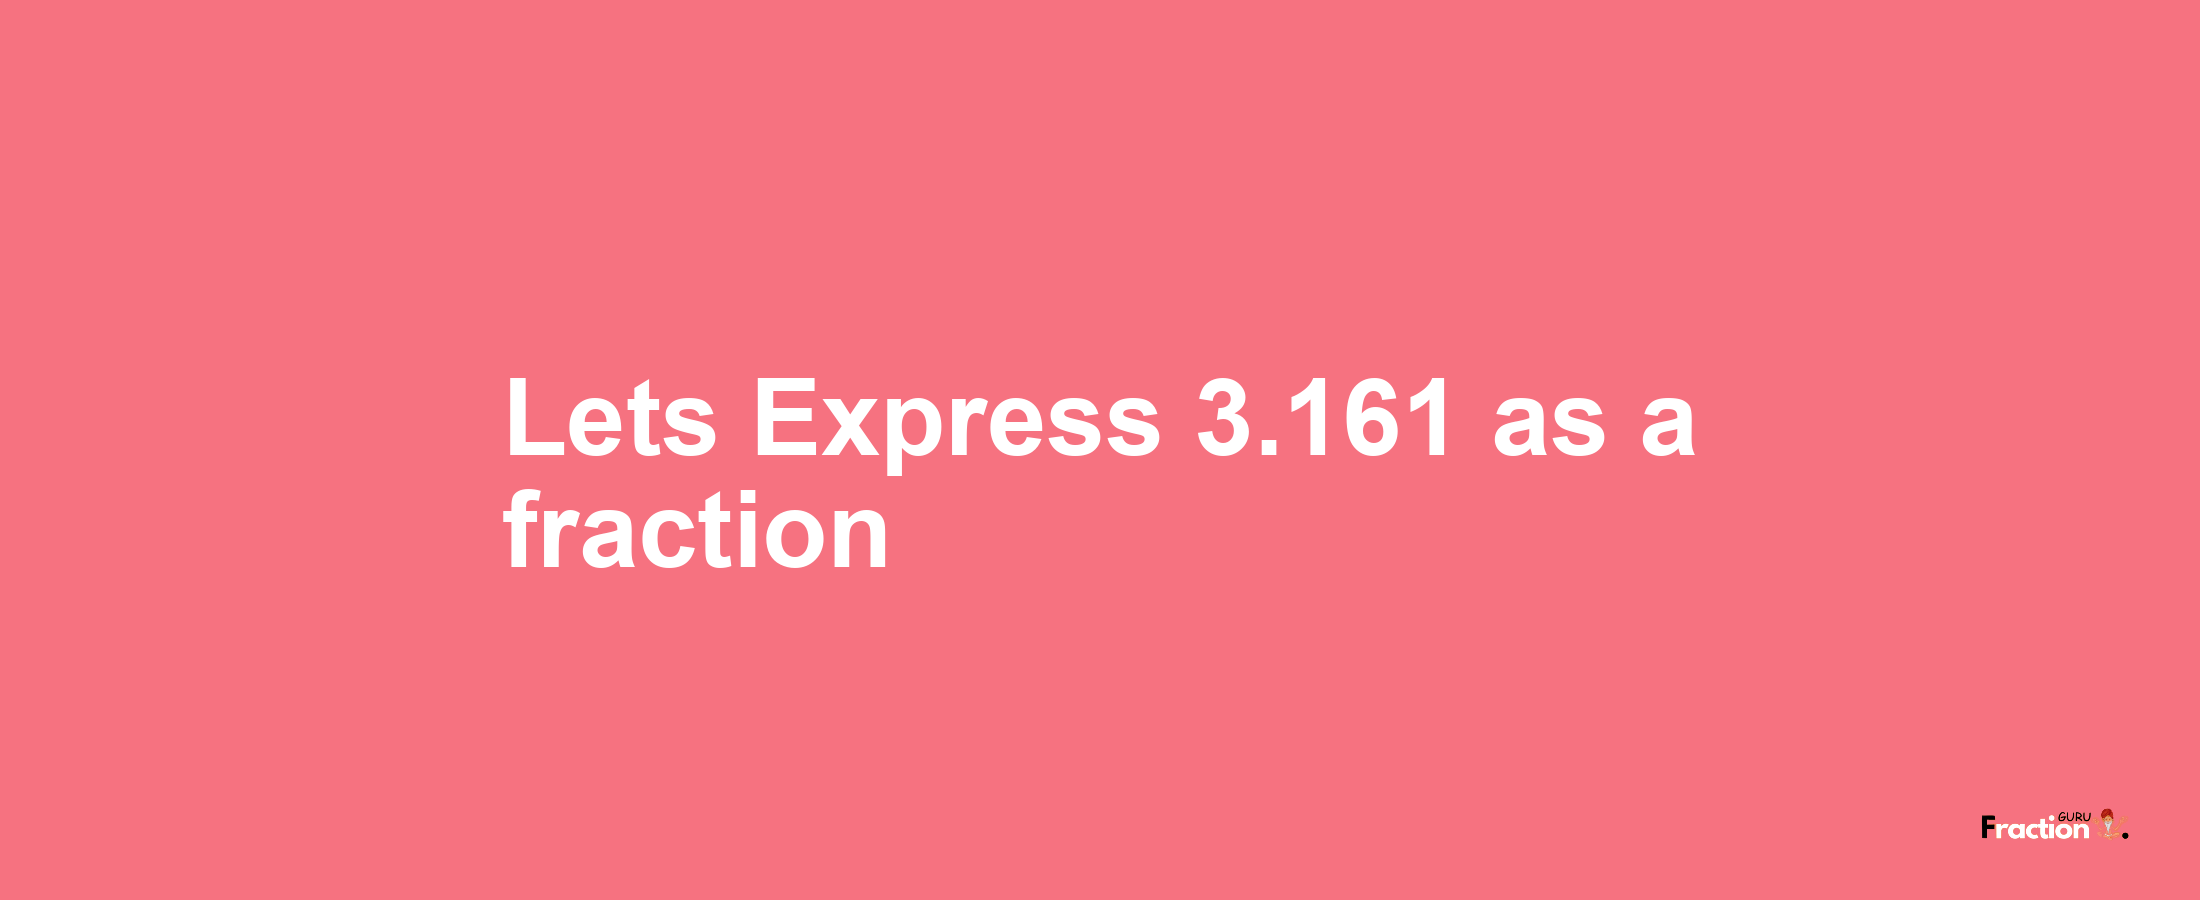 Lets Express 3.161 as afraction